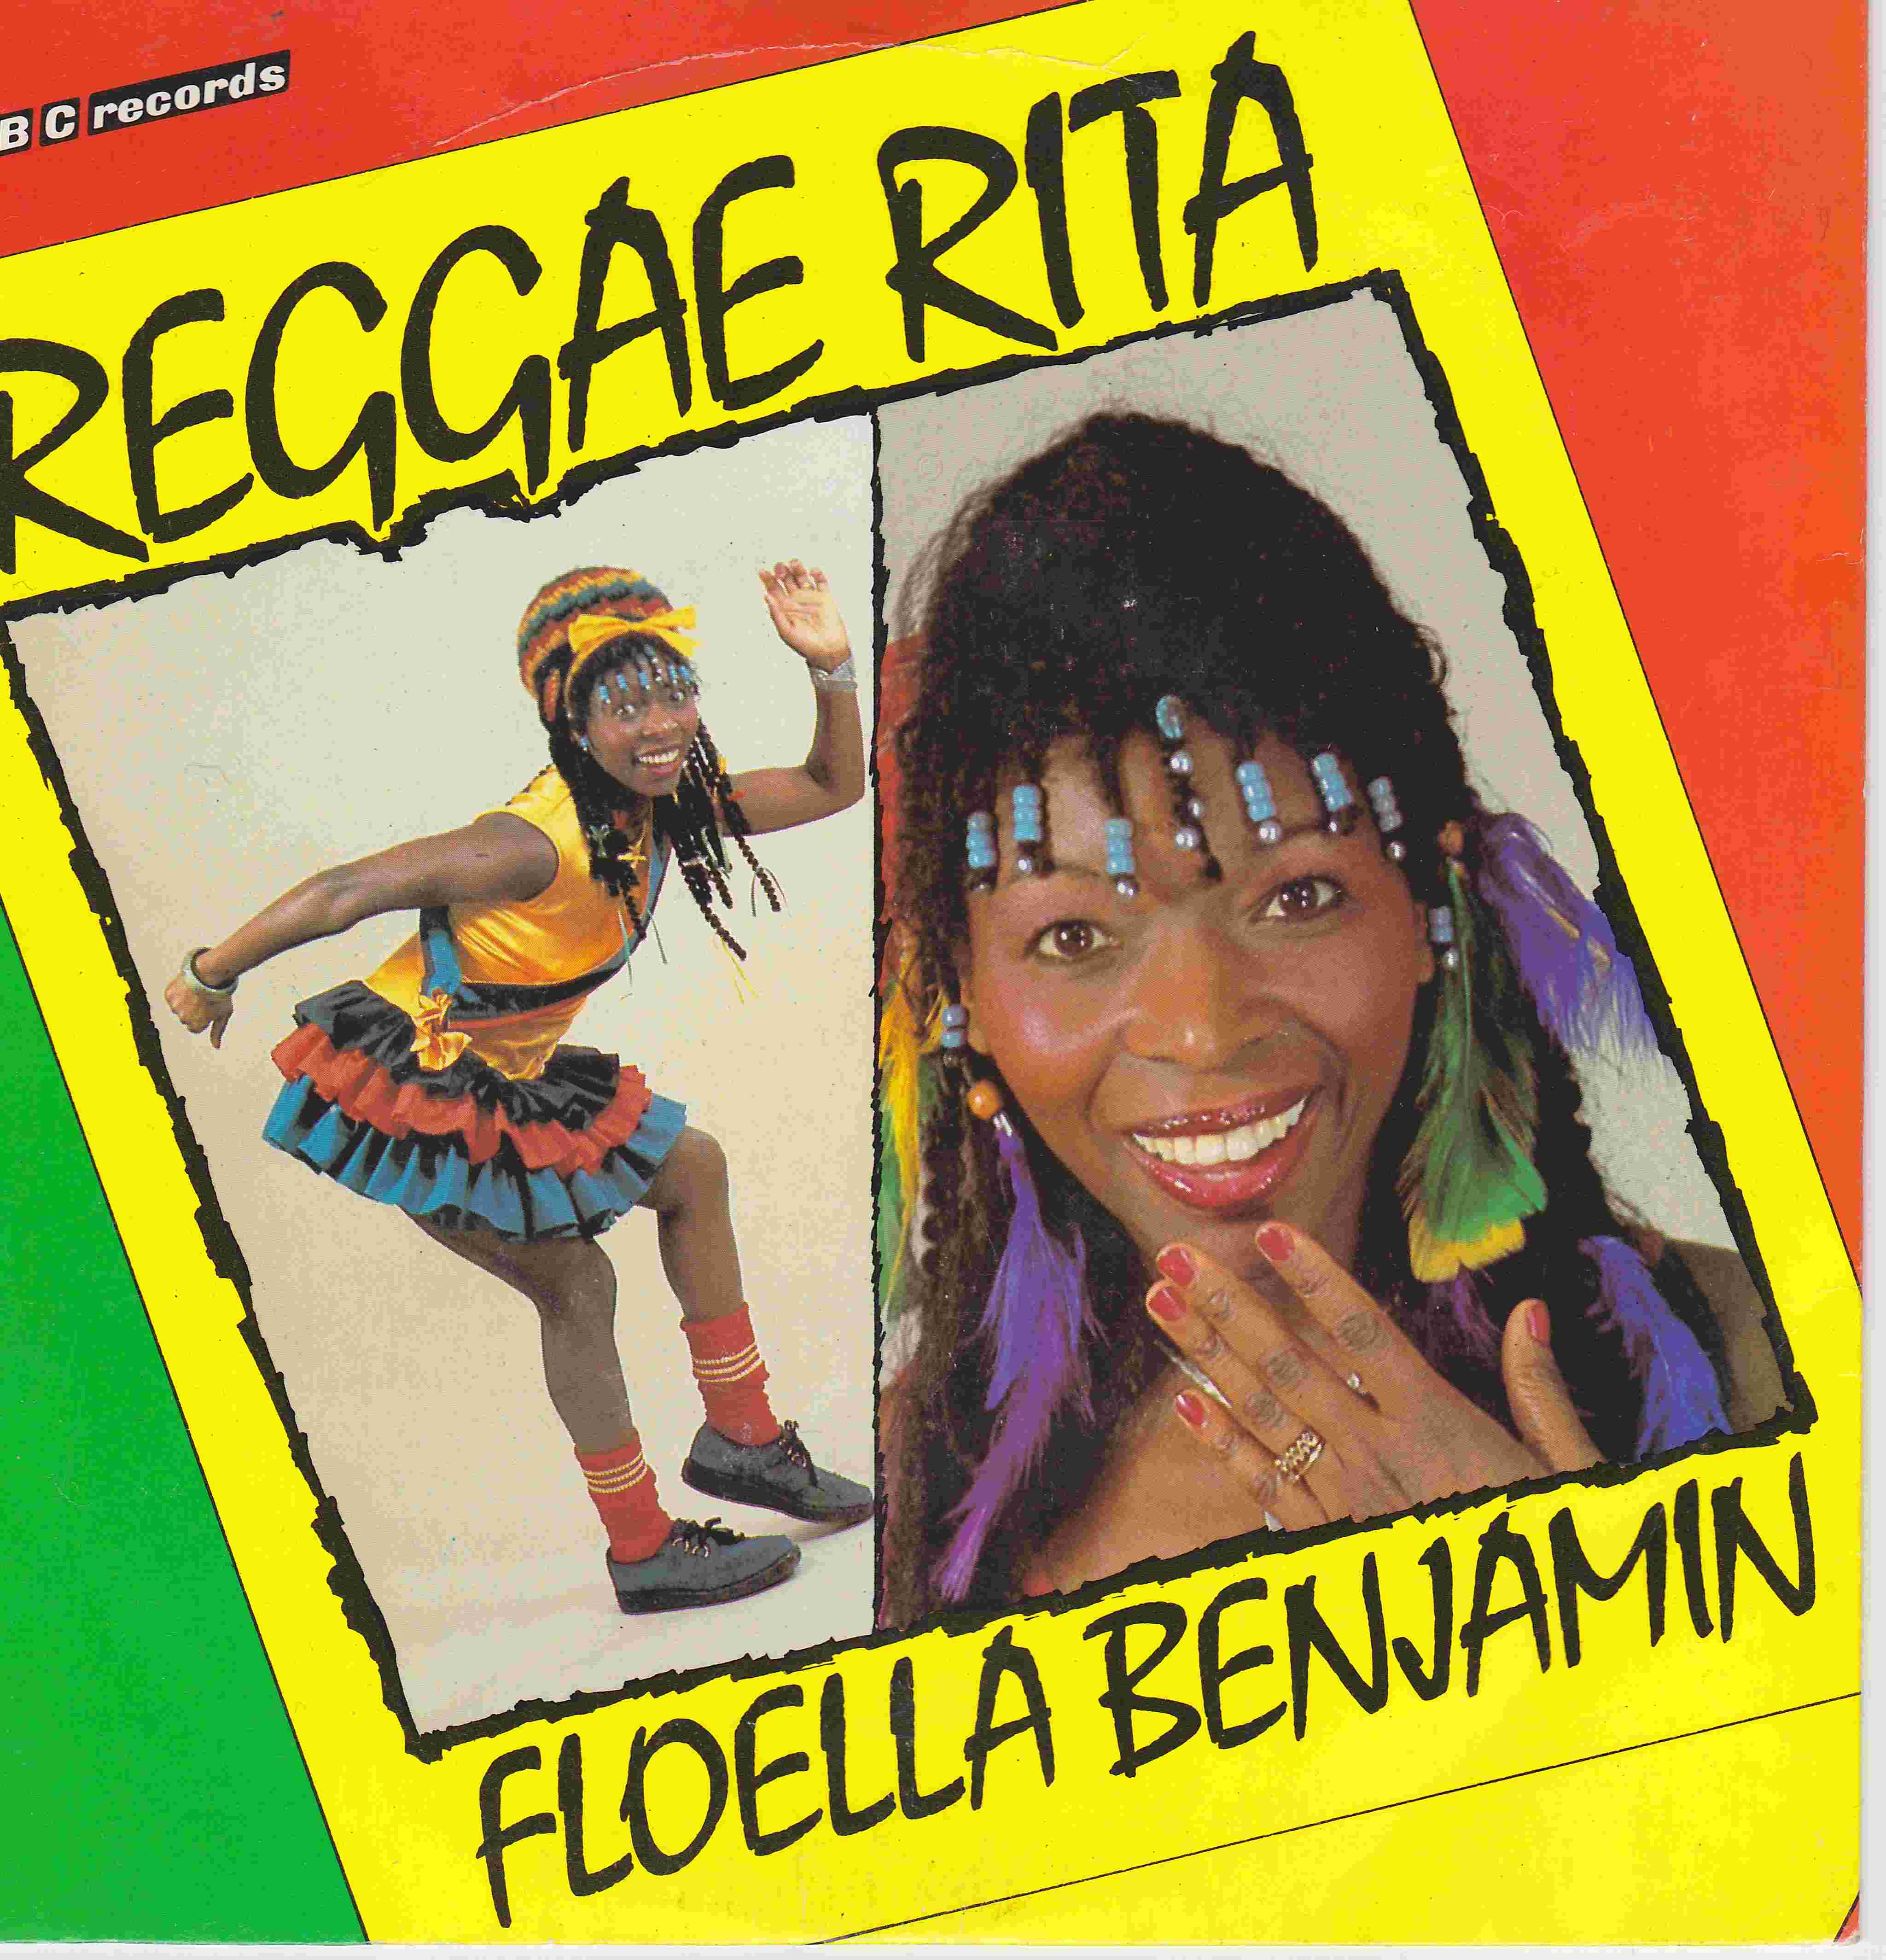 Picture of RESL 142 Reggae Rita by artist Floella Benjamin / Dr. Dread Gosling \(Peter Gosling\) from the BBC records and Tapes library